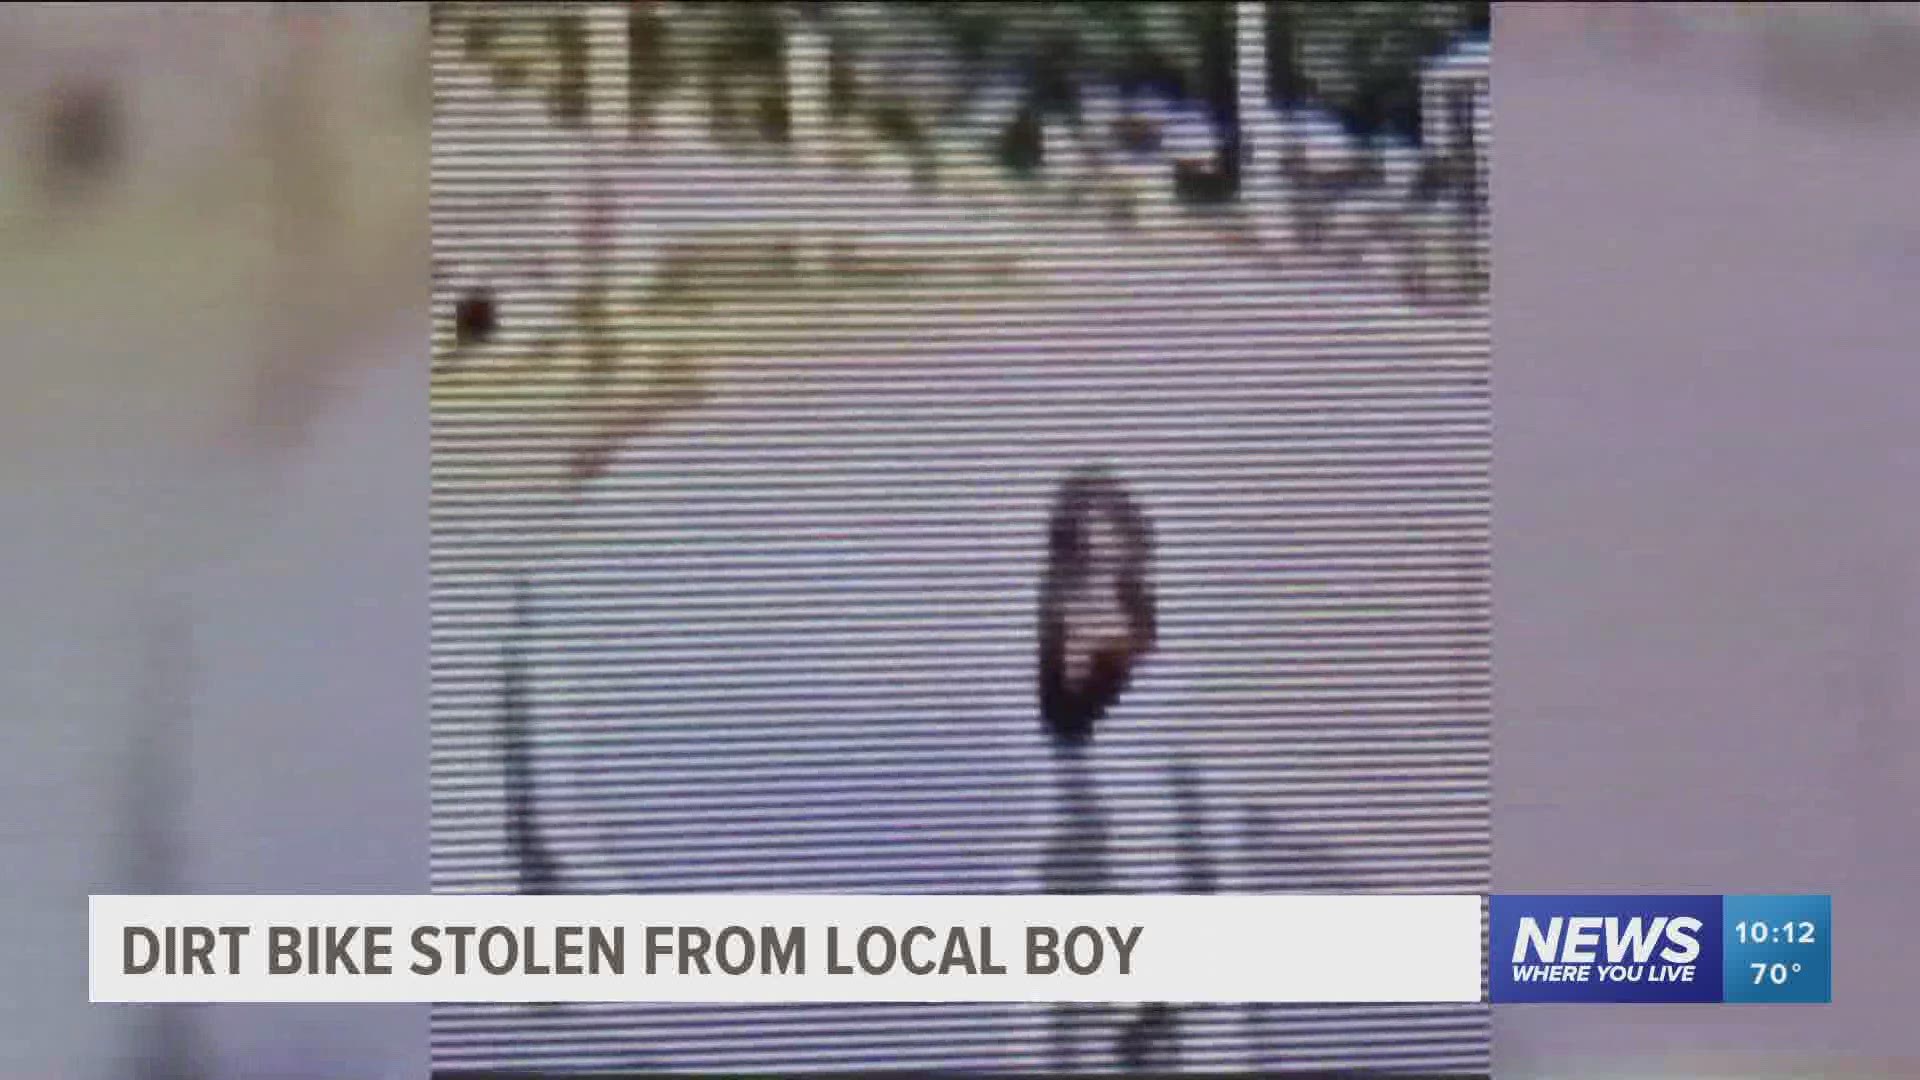 Police are searching for the man who stole a dirt bike from an 8-year-old boy in Fayetteville. https://bit.ly/2VhJjnm